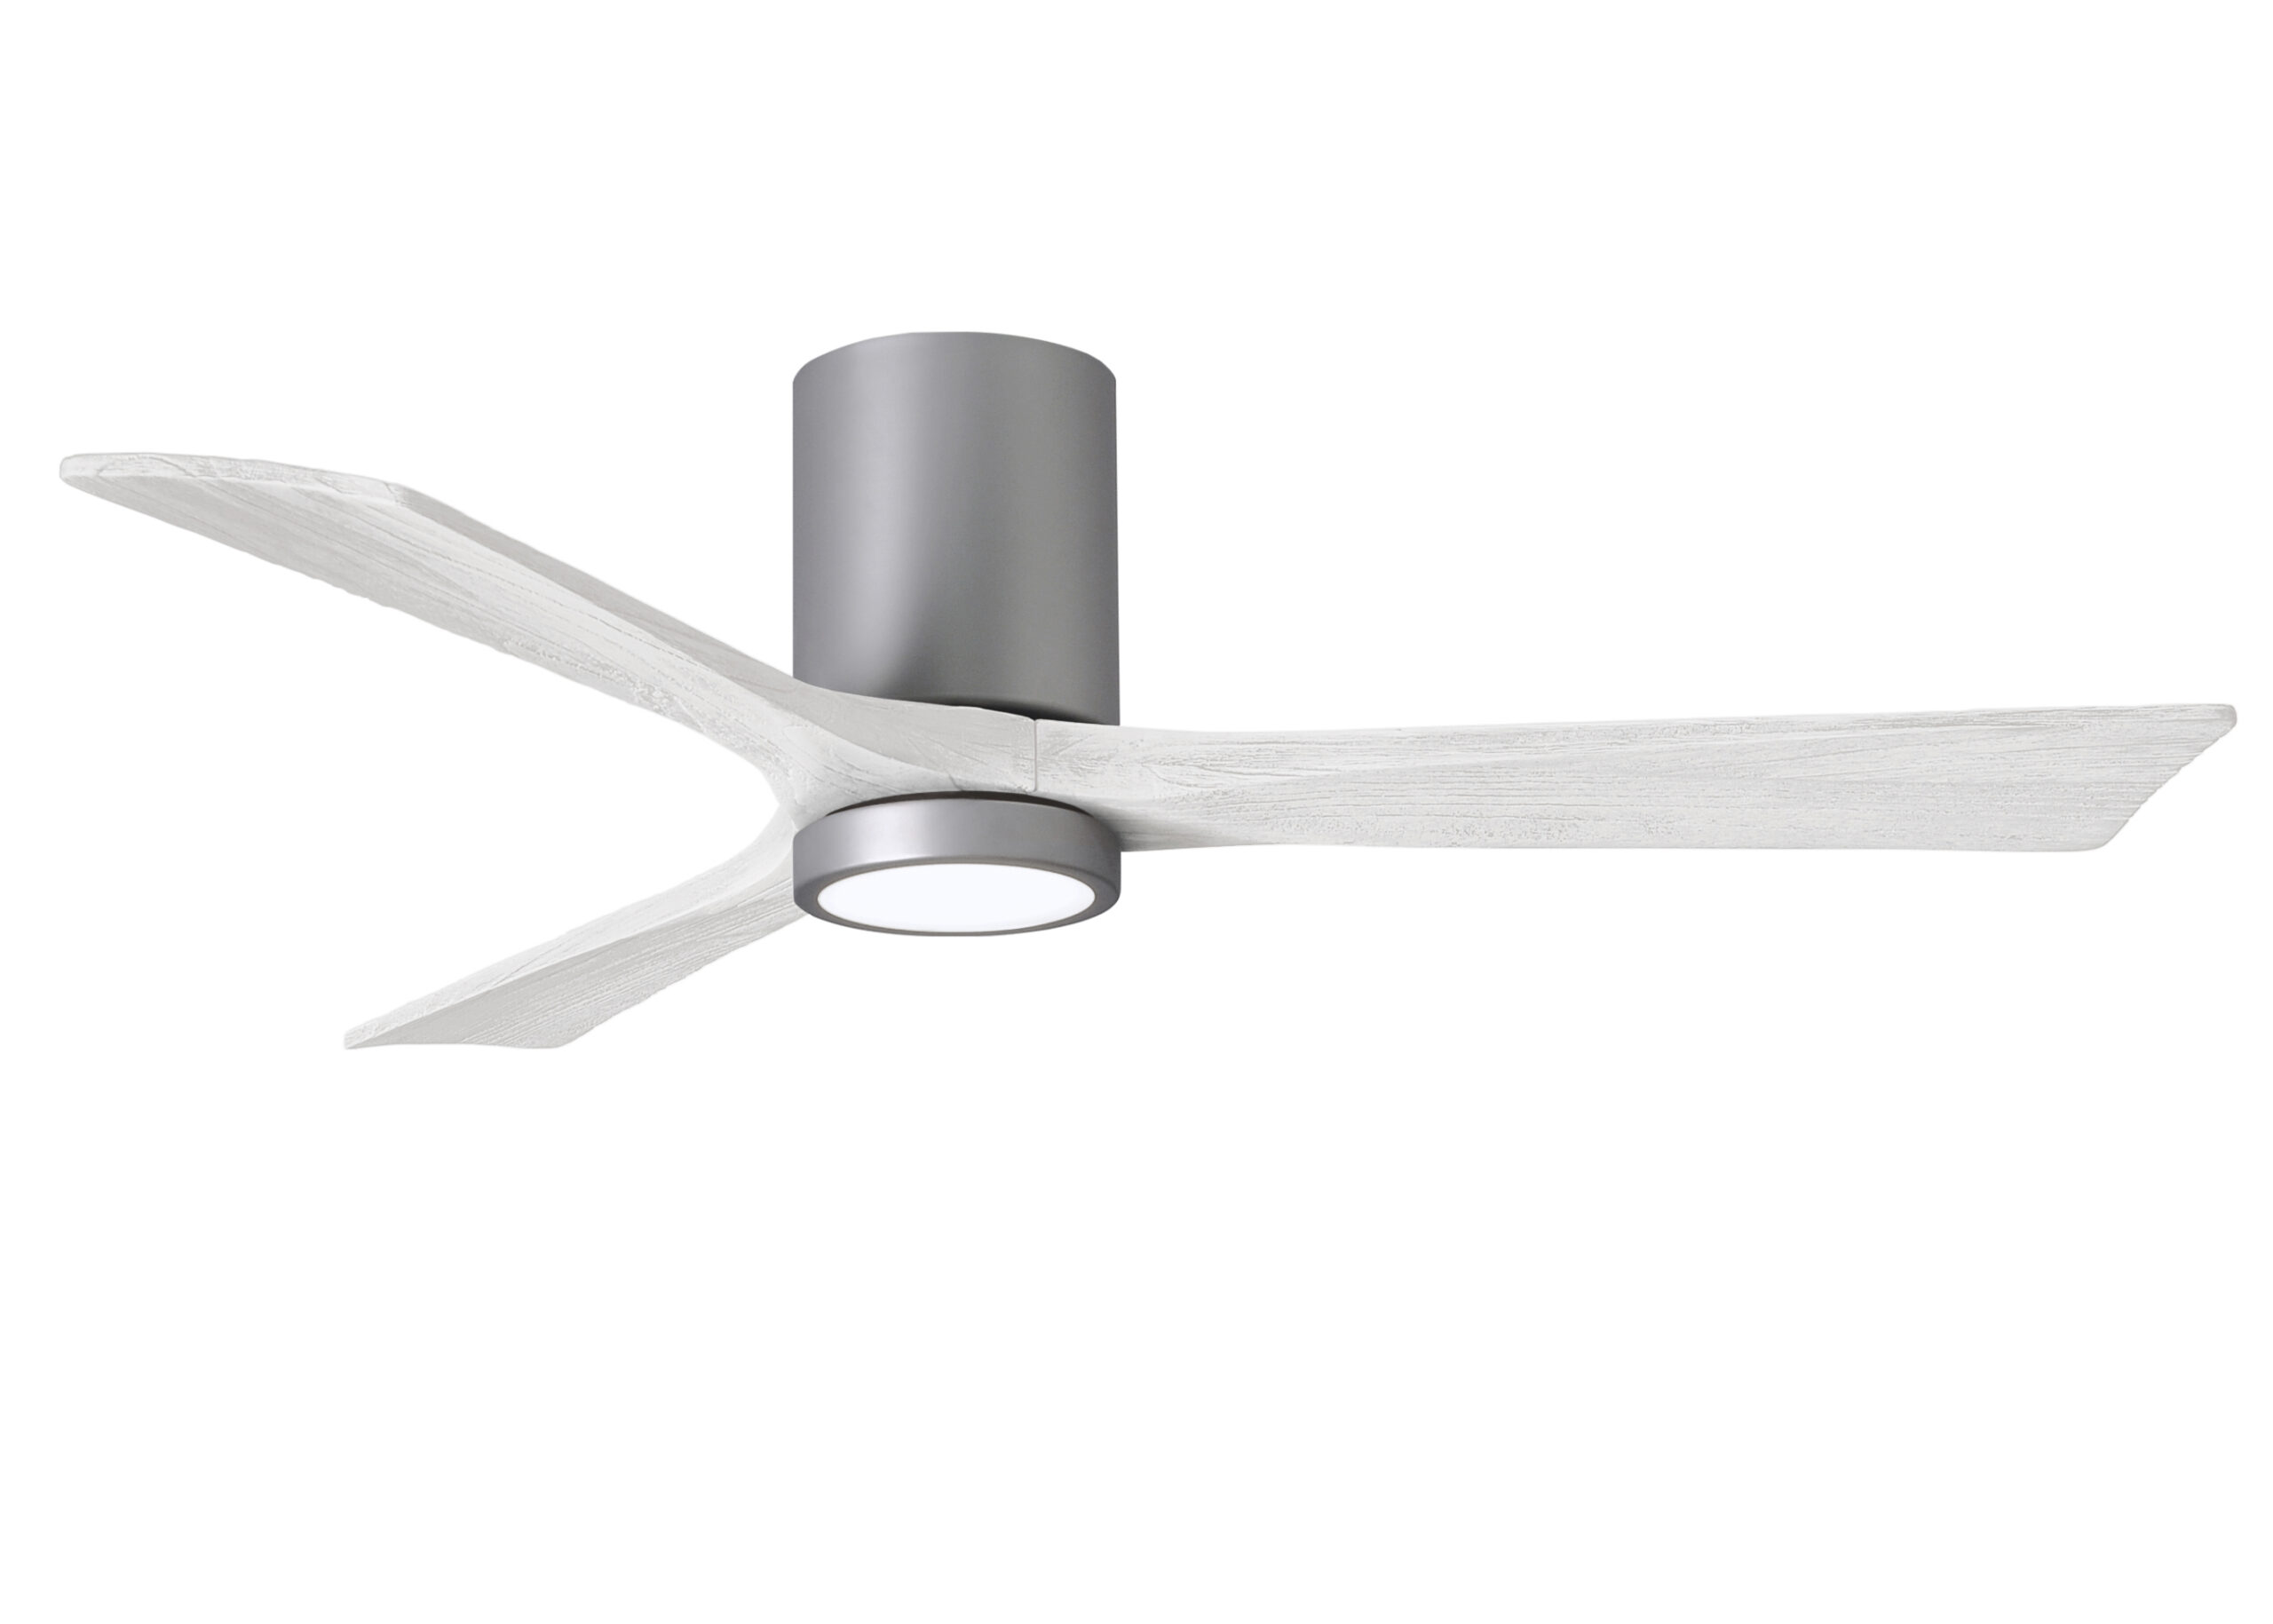 Irene-3HLK Ceiling Fan in Brushed Nickel Finish with 52